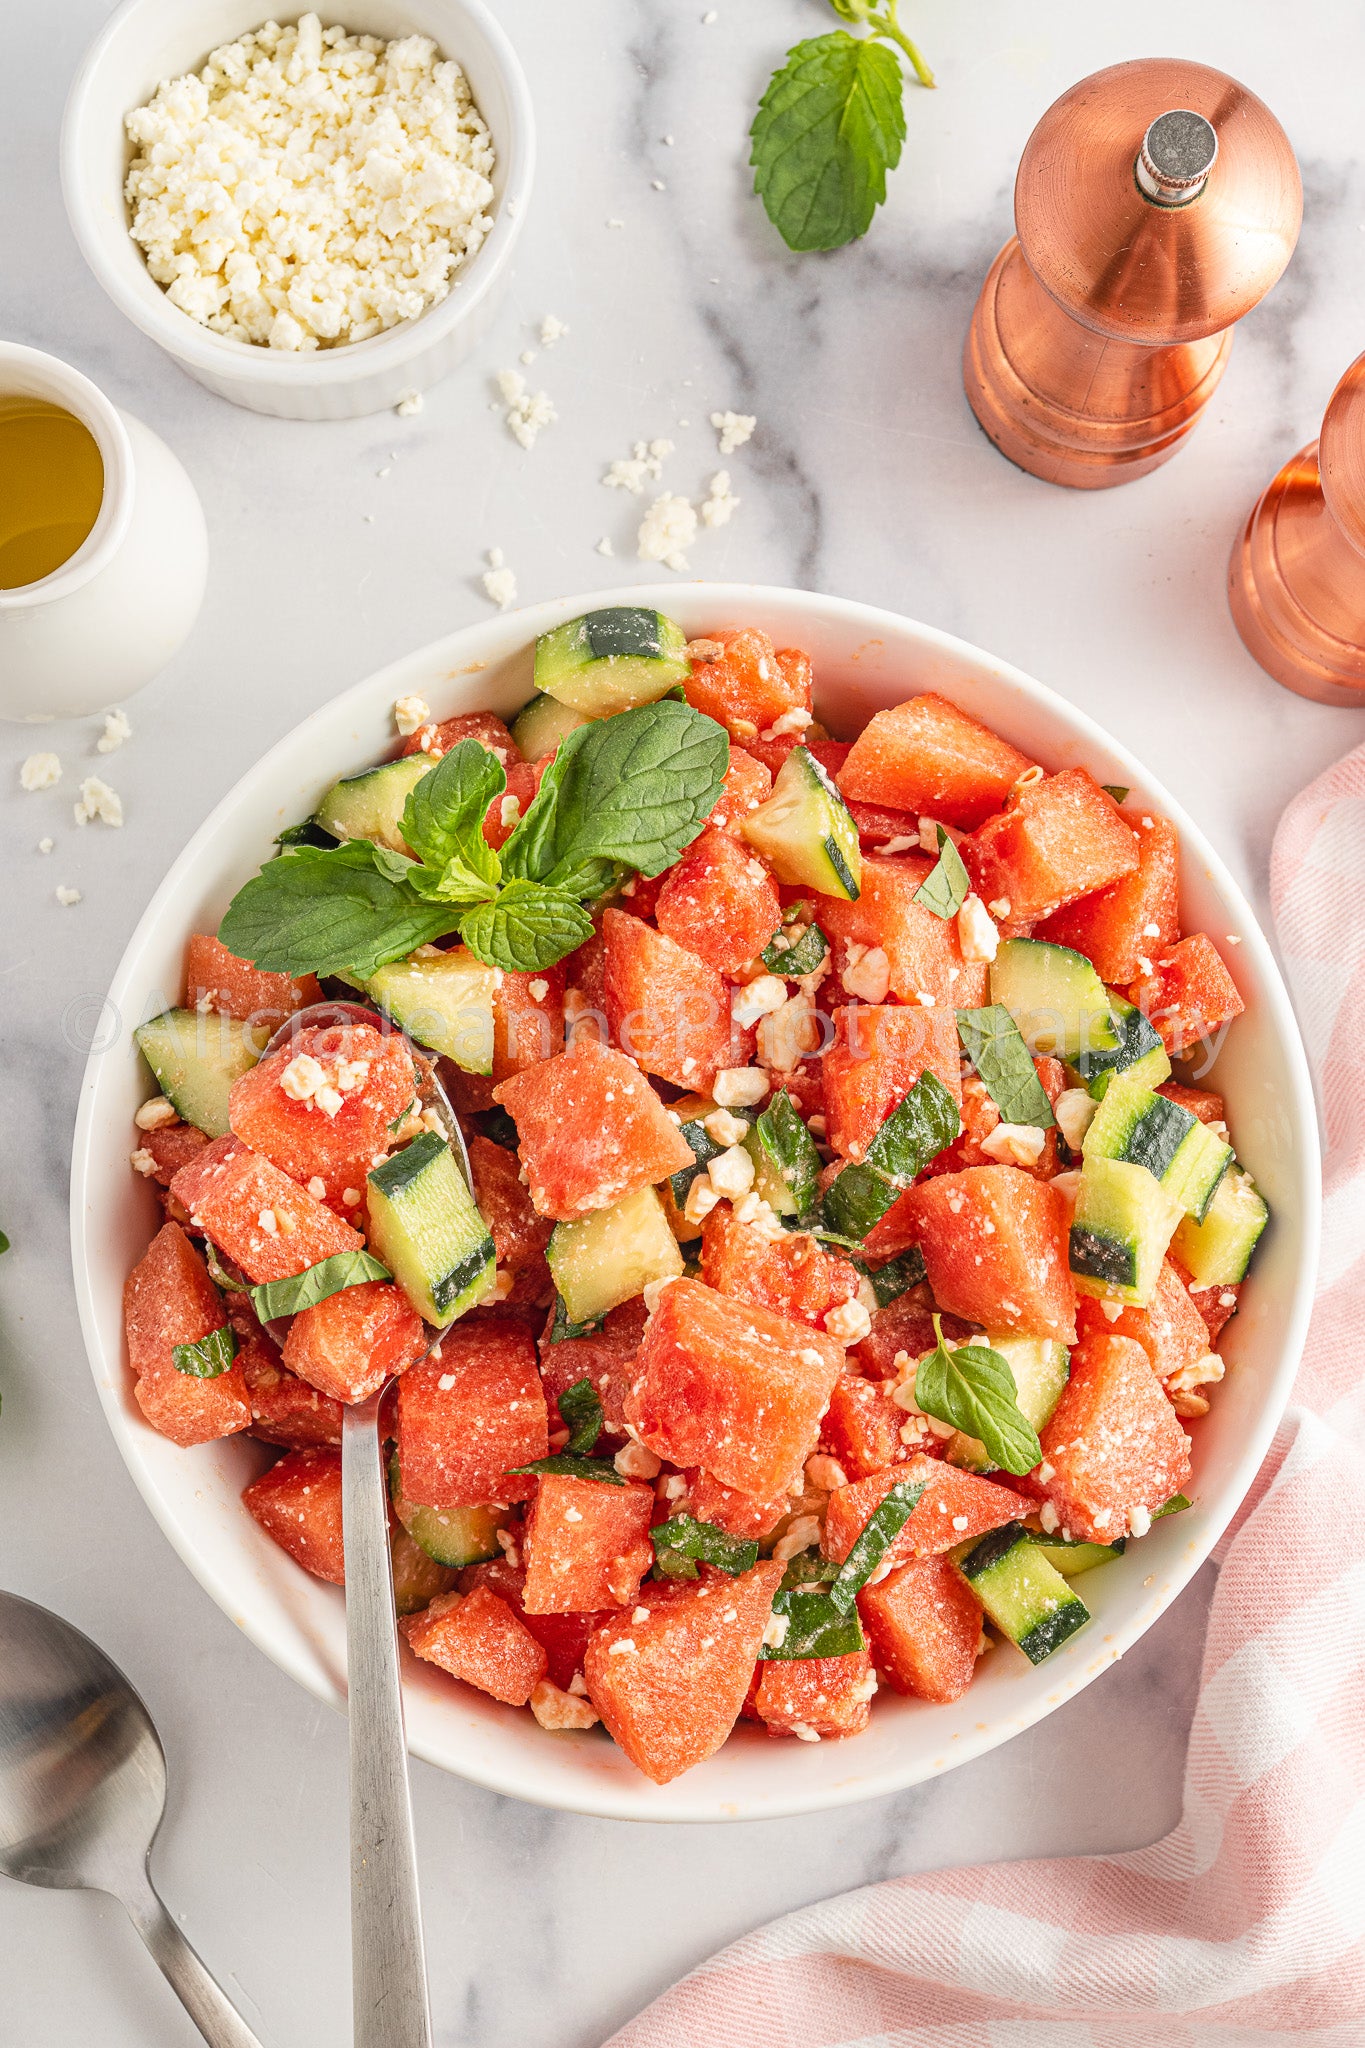 Watermelon Salad with Feta and Mint - *EXCLUSIVE*